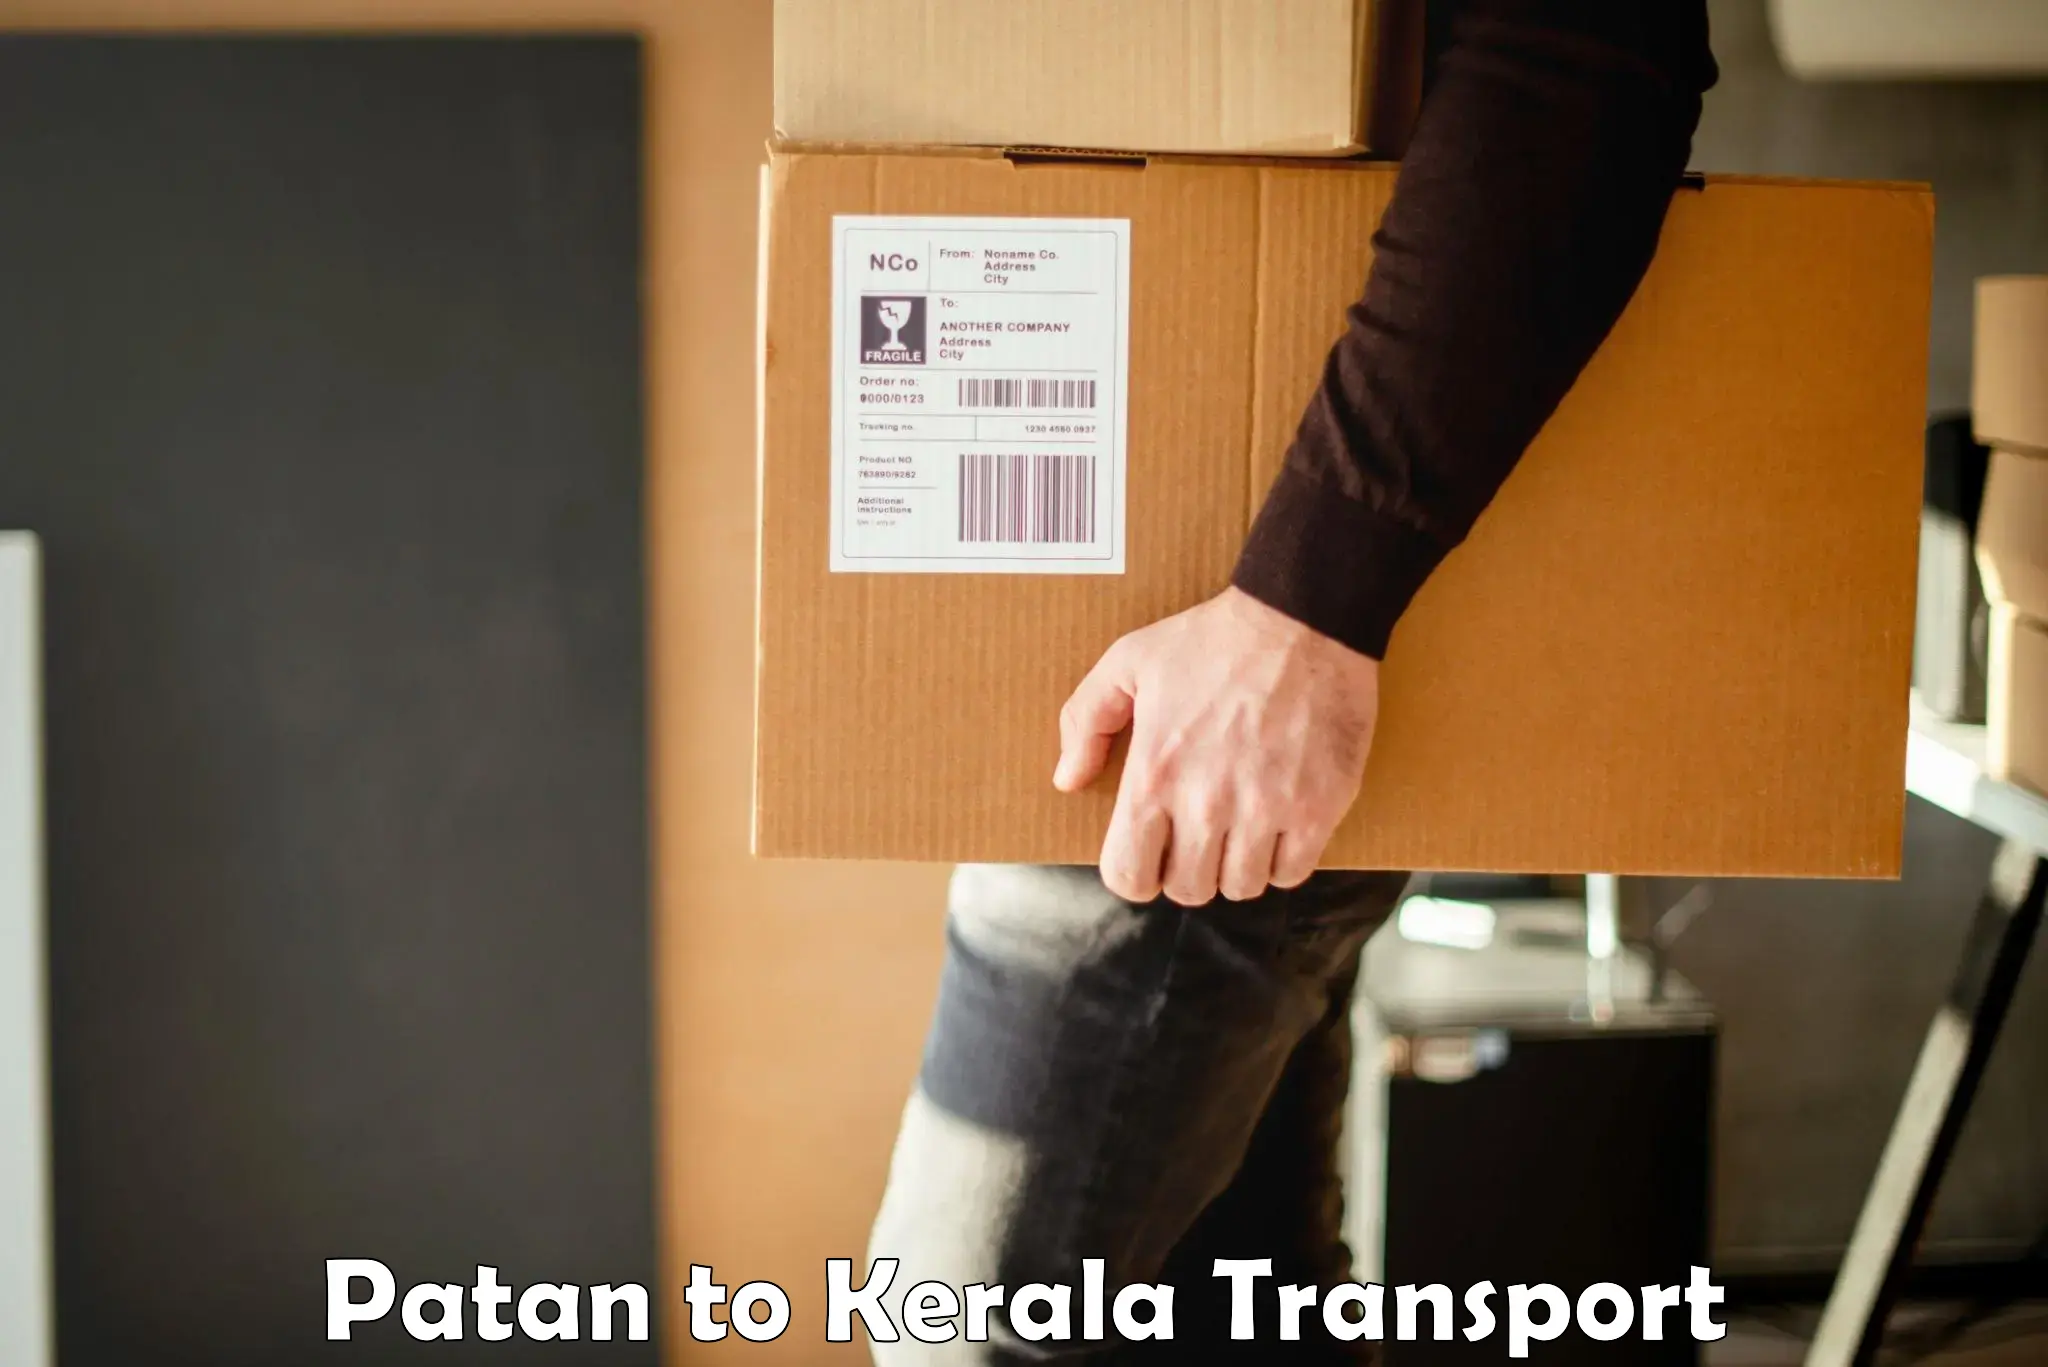 Daily transport service Patan to Cochin